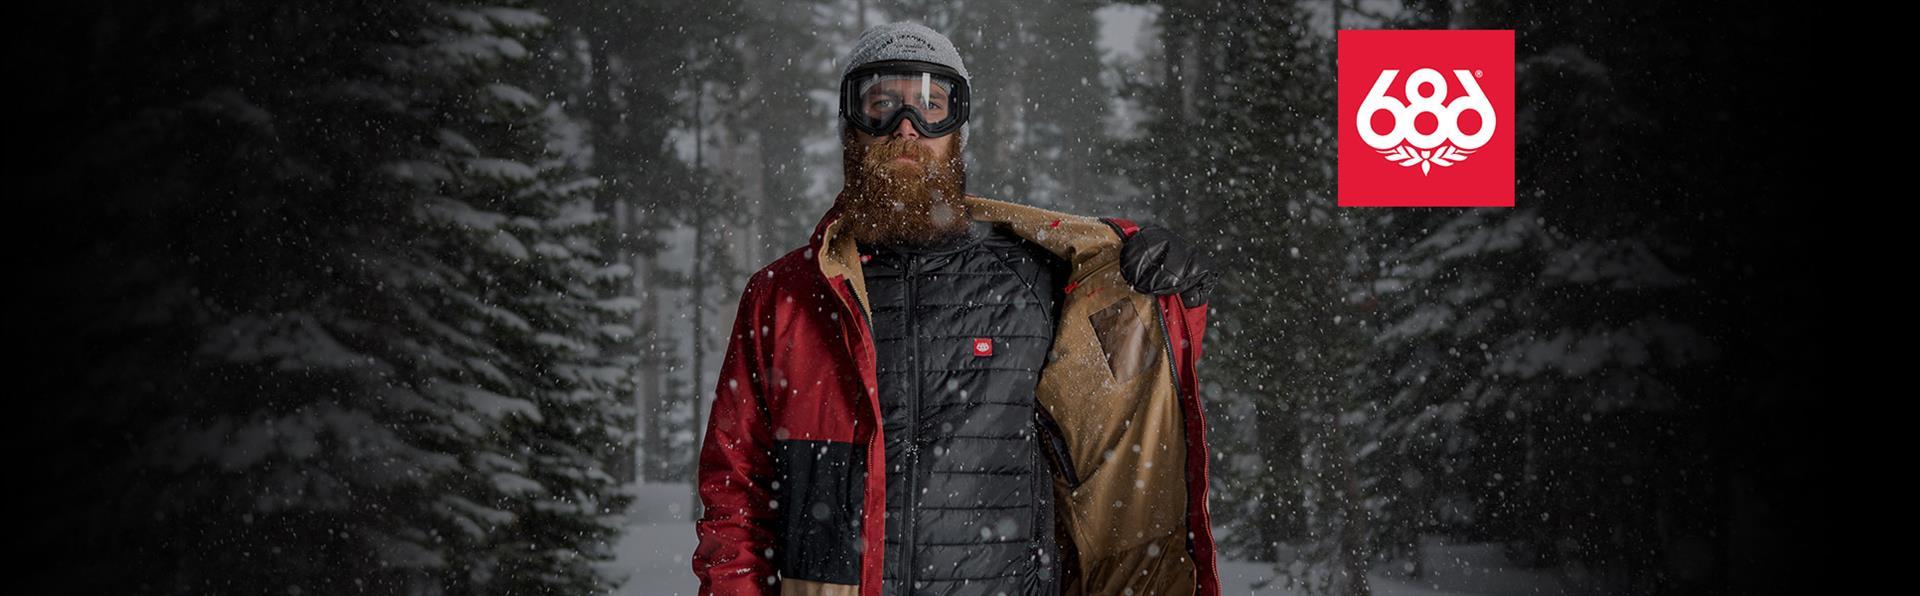 686 Snowboarding Logo - Snowboard Outfitter 686 Shows Off 4 Keys To Global Brand Success ...